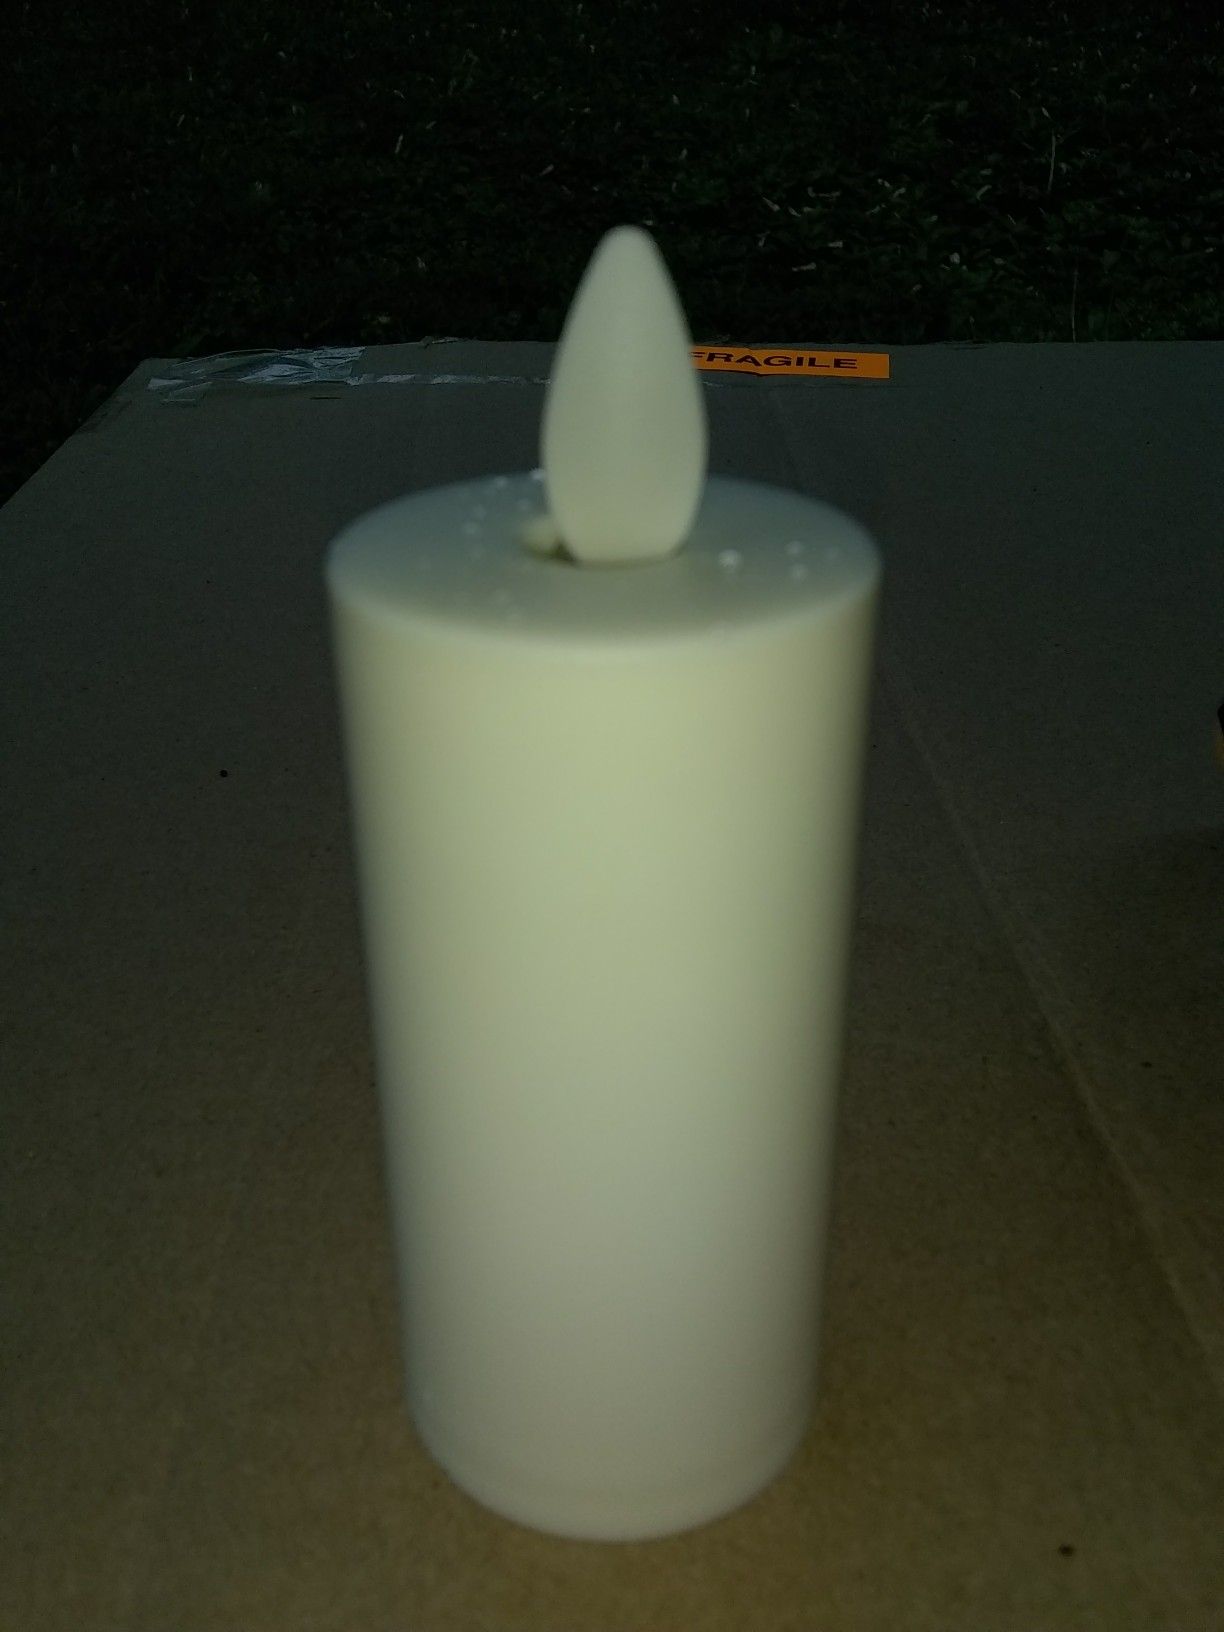 Flameless candle